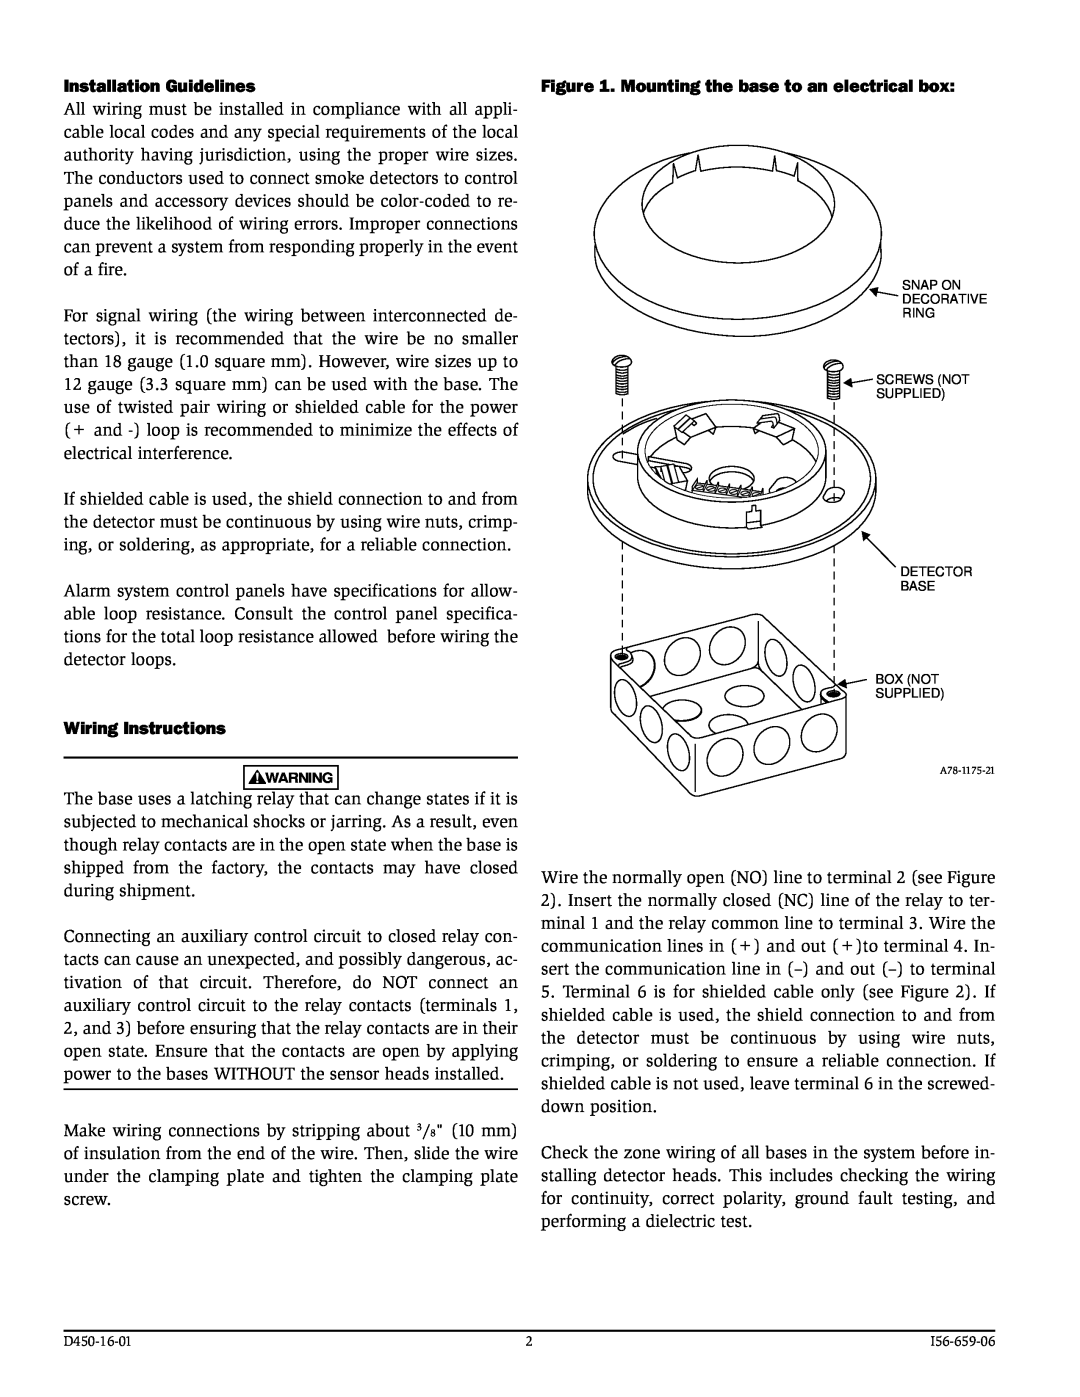 System Sensor B224RB(A) Installation Guidelines, Wiring Instructions, Mounting the base to an electrical box, D450-16-01 